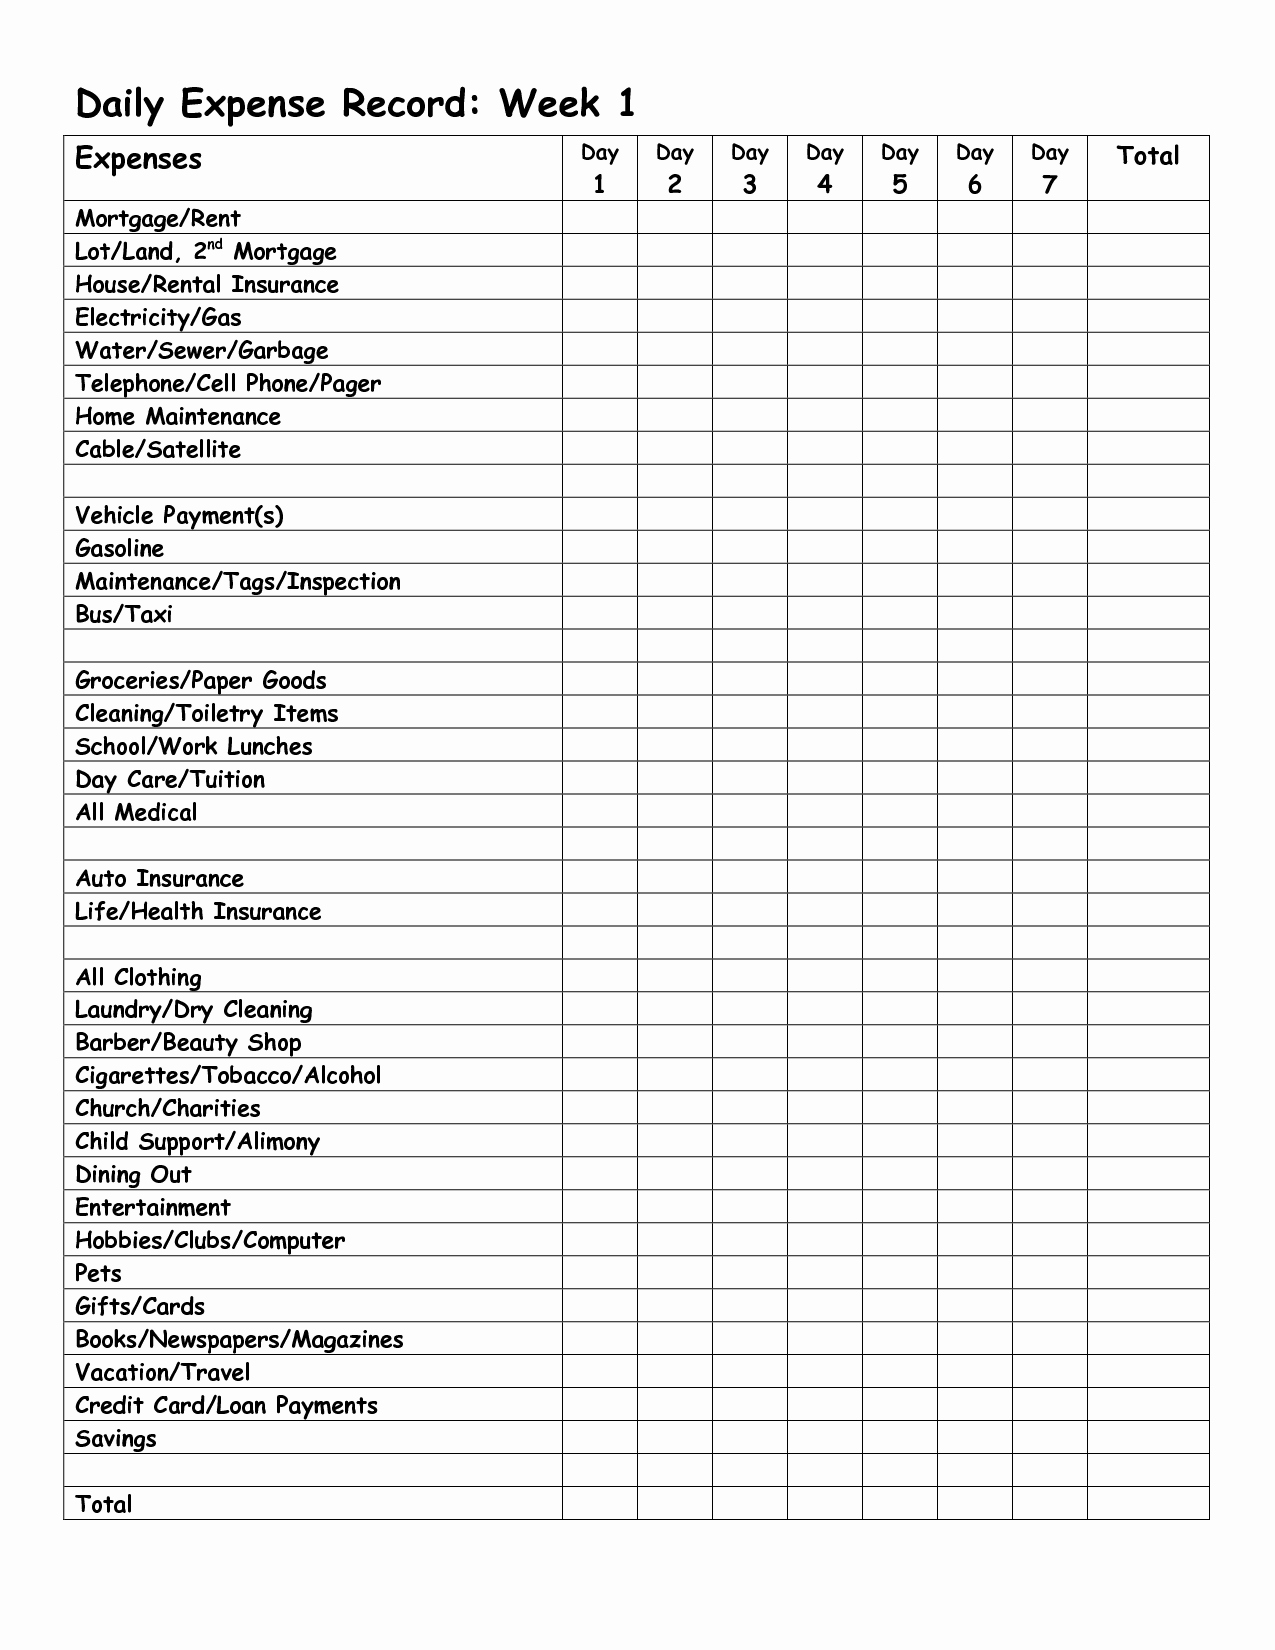 Daily Budget Template Excel Lovely Monthly Expense Report Template